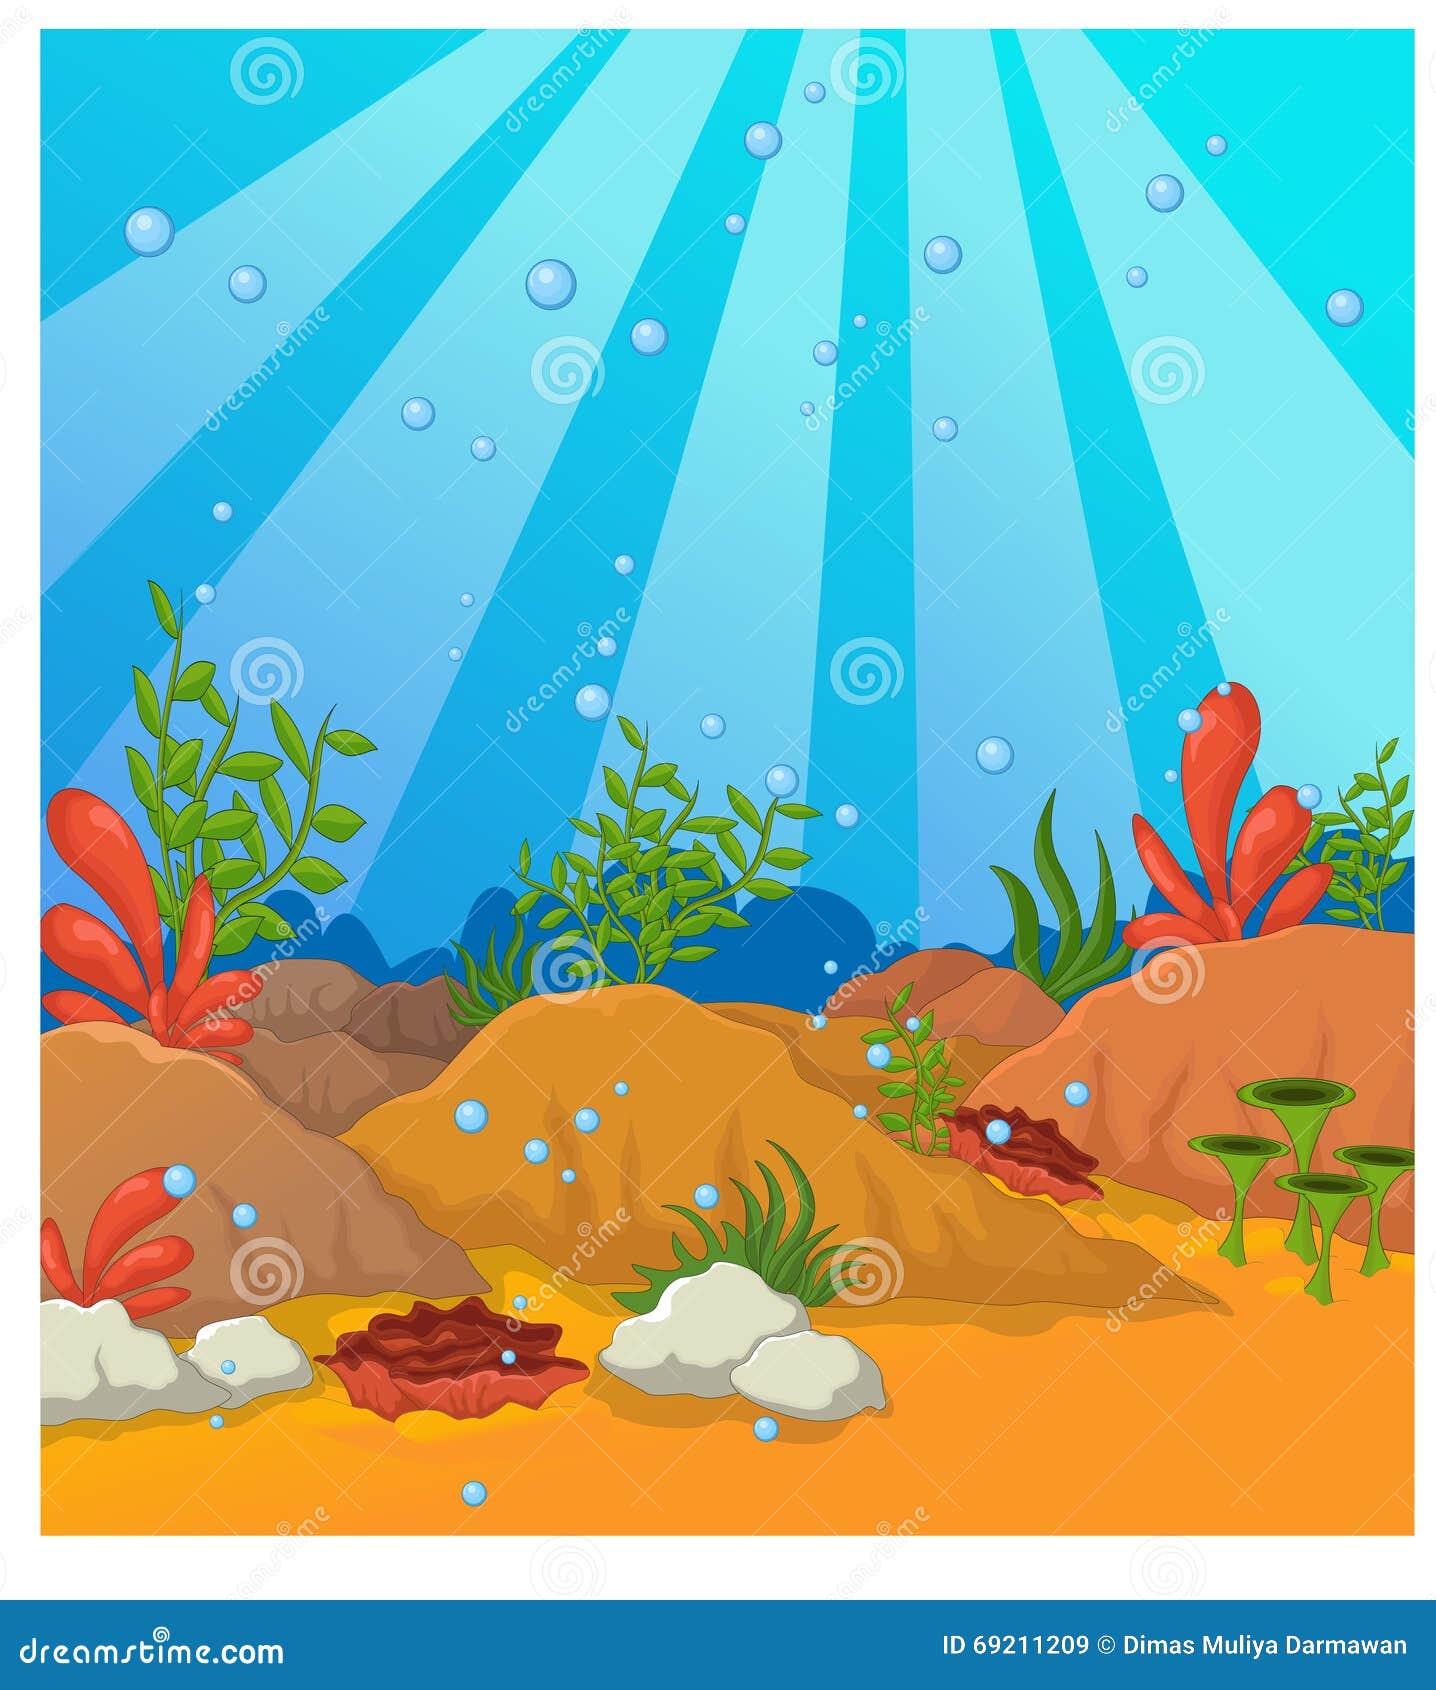 under the sea background